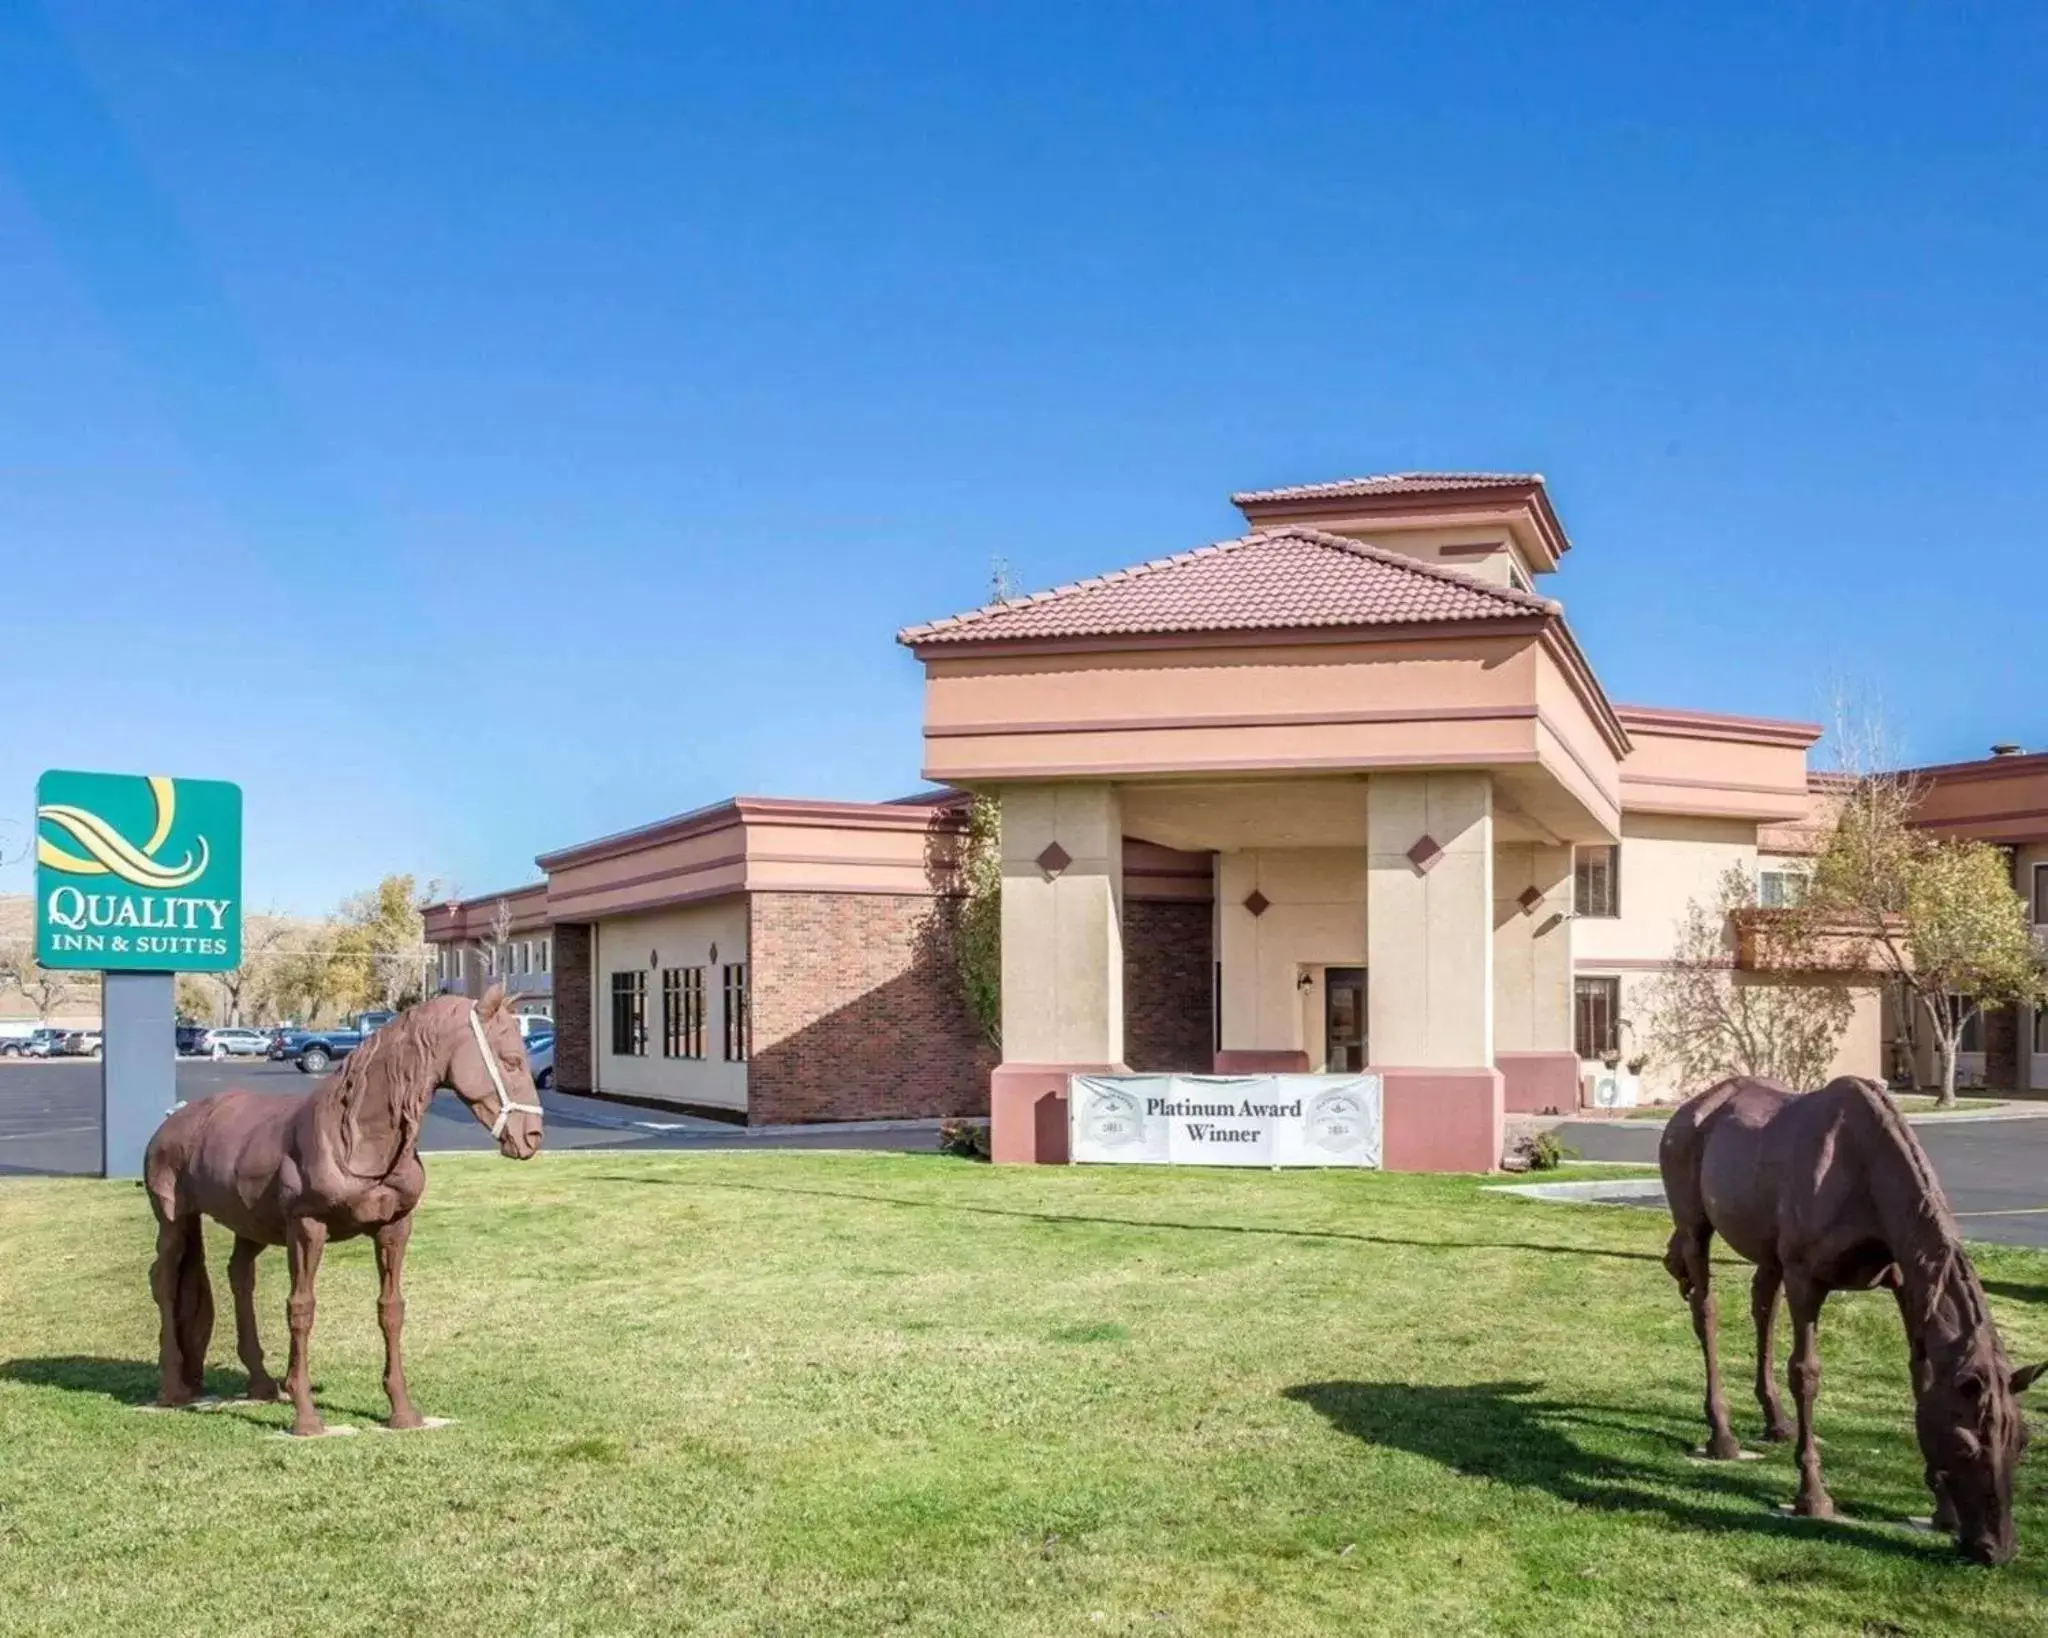 Property building, Other Animals in Quality Inn & Suites Casper near Event Center